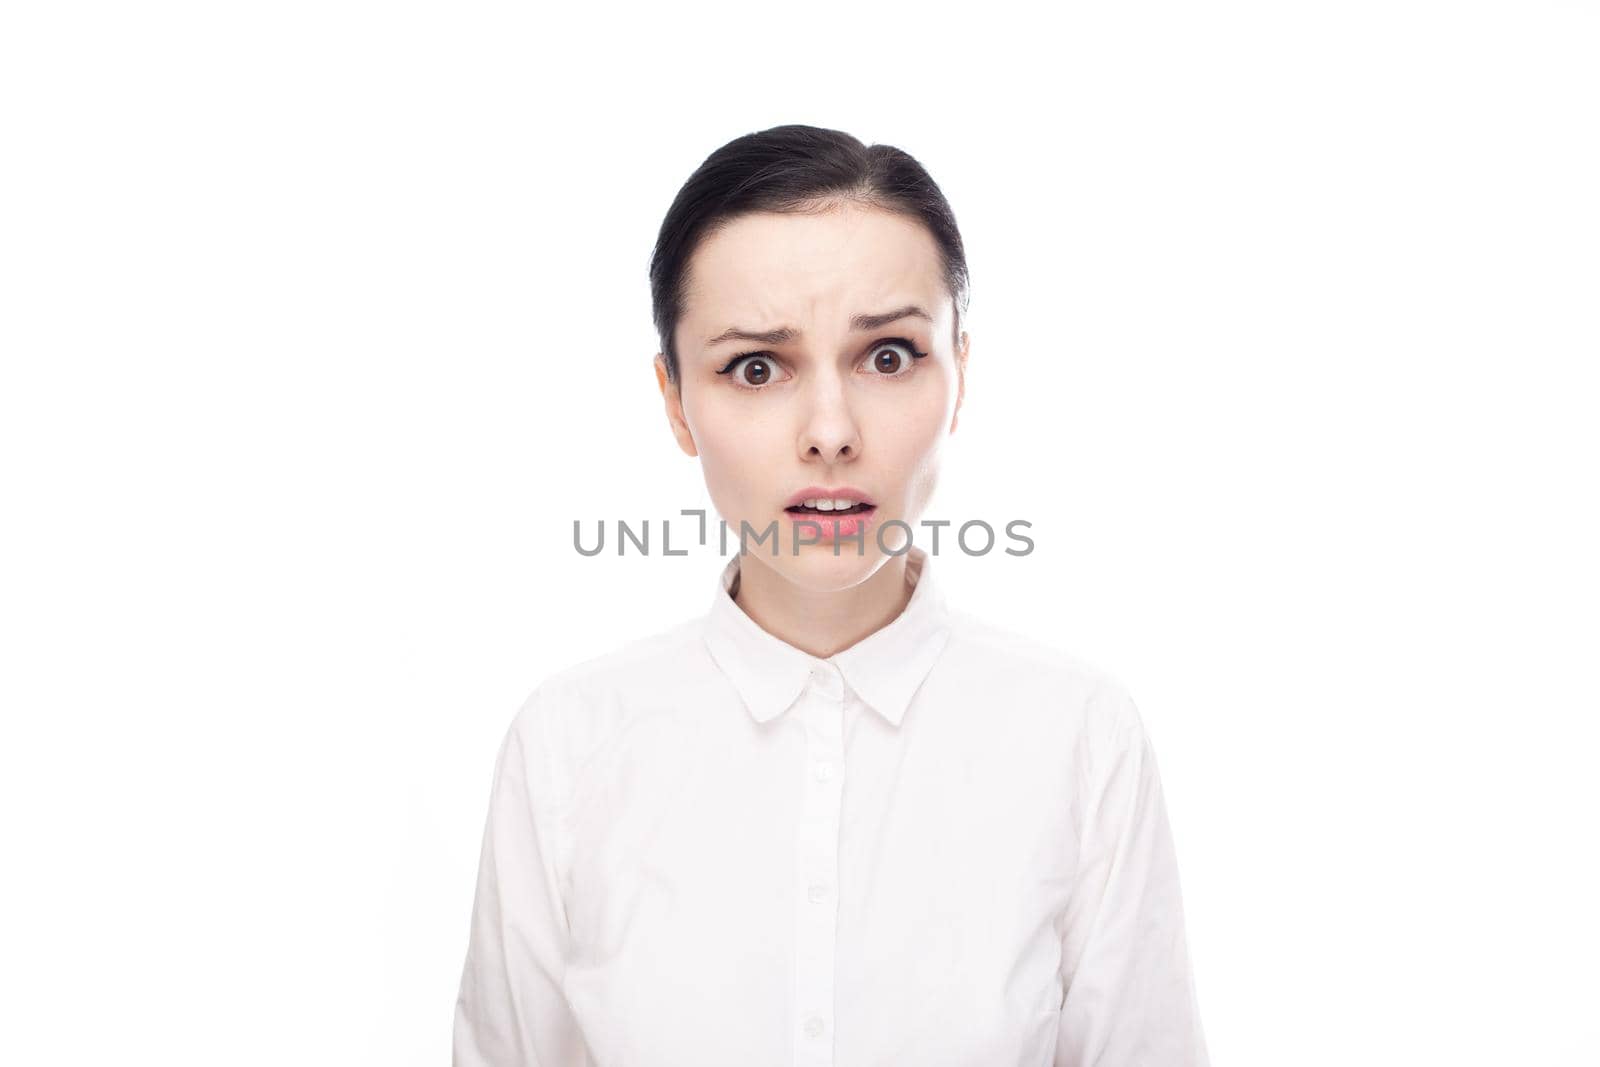 displeased woman in white shirt on white background by shilovskaya